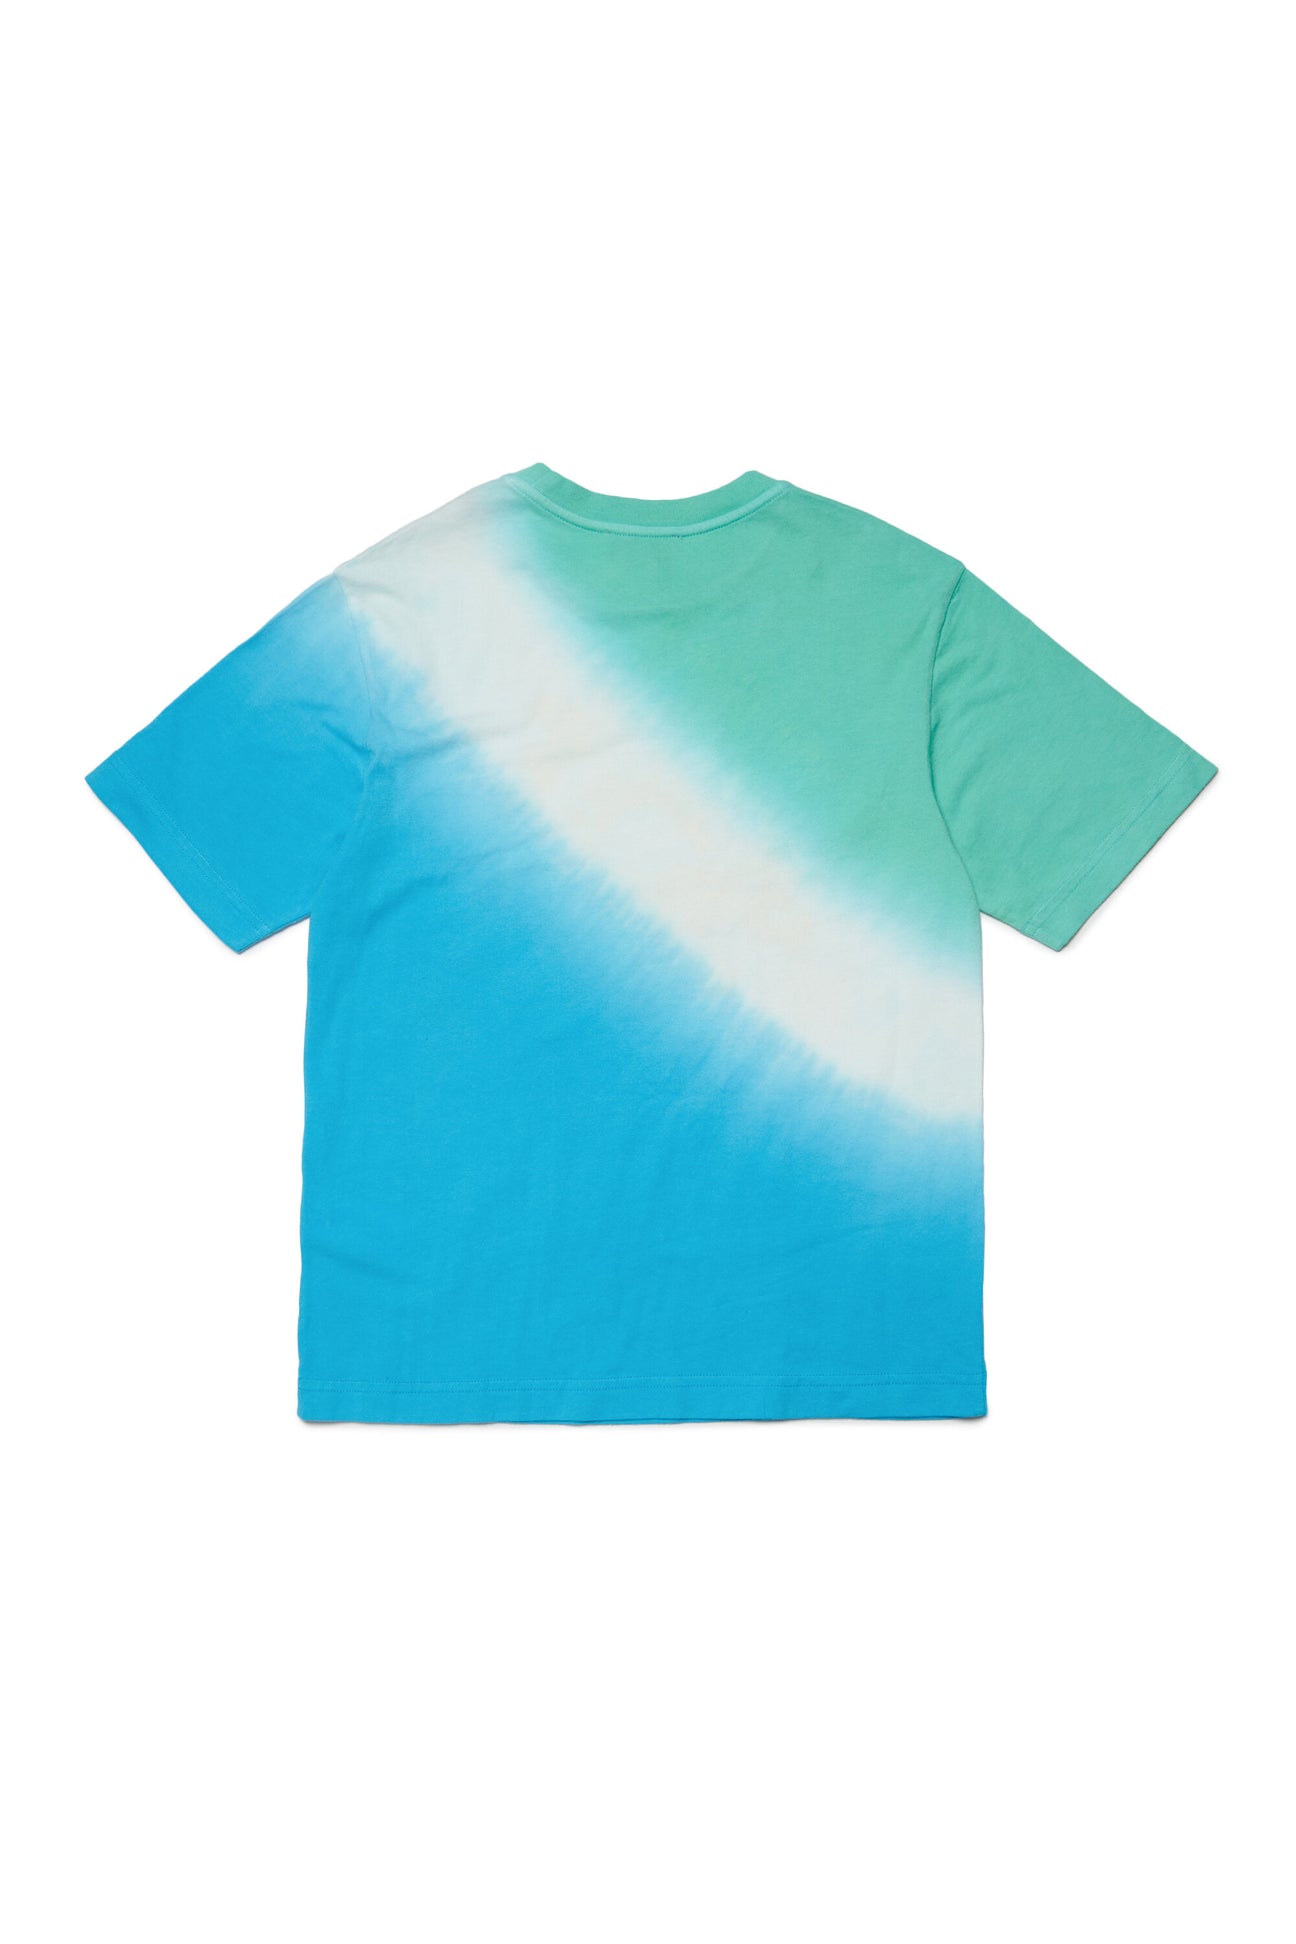 T-shirt multicolor dip-dyed T-shirt multicolor dip-dyed